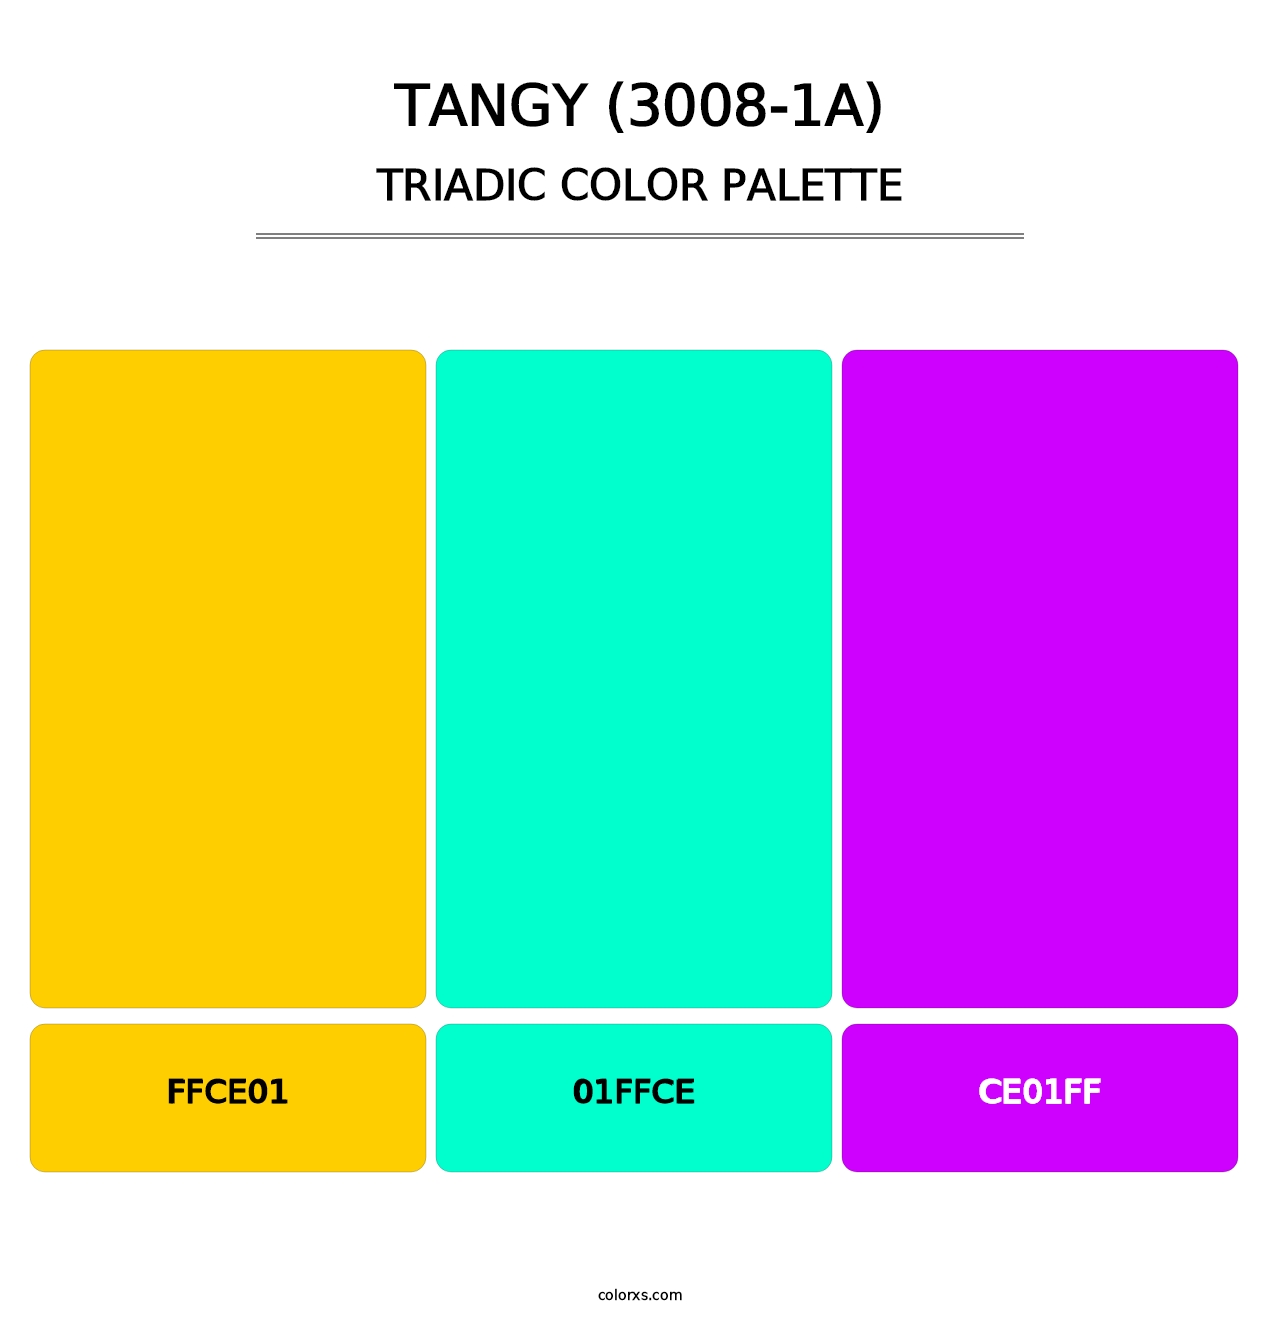 Tangy (3008-1A) - Triadic Color Palette